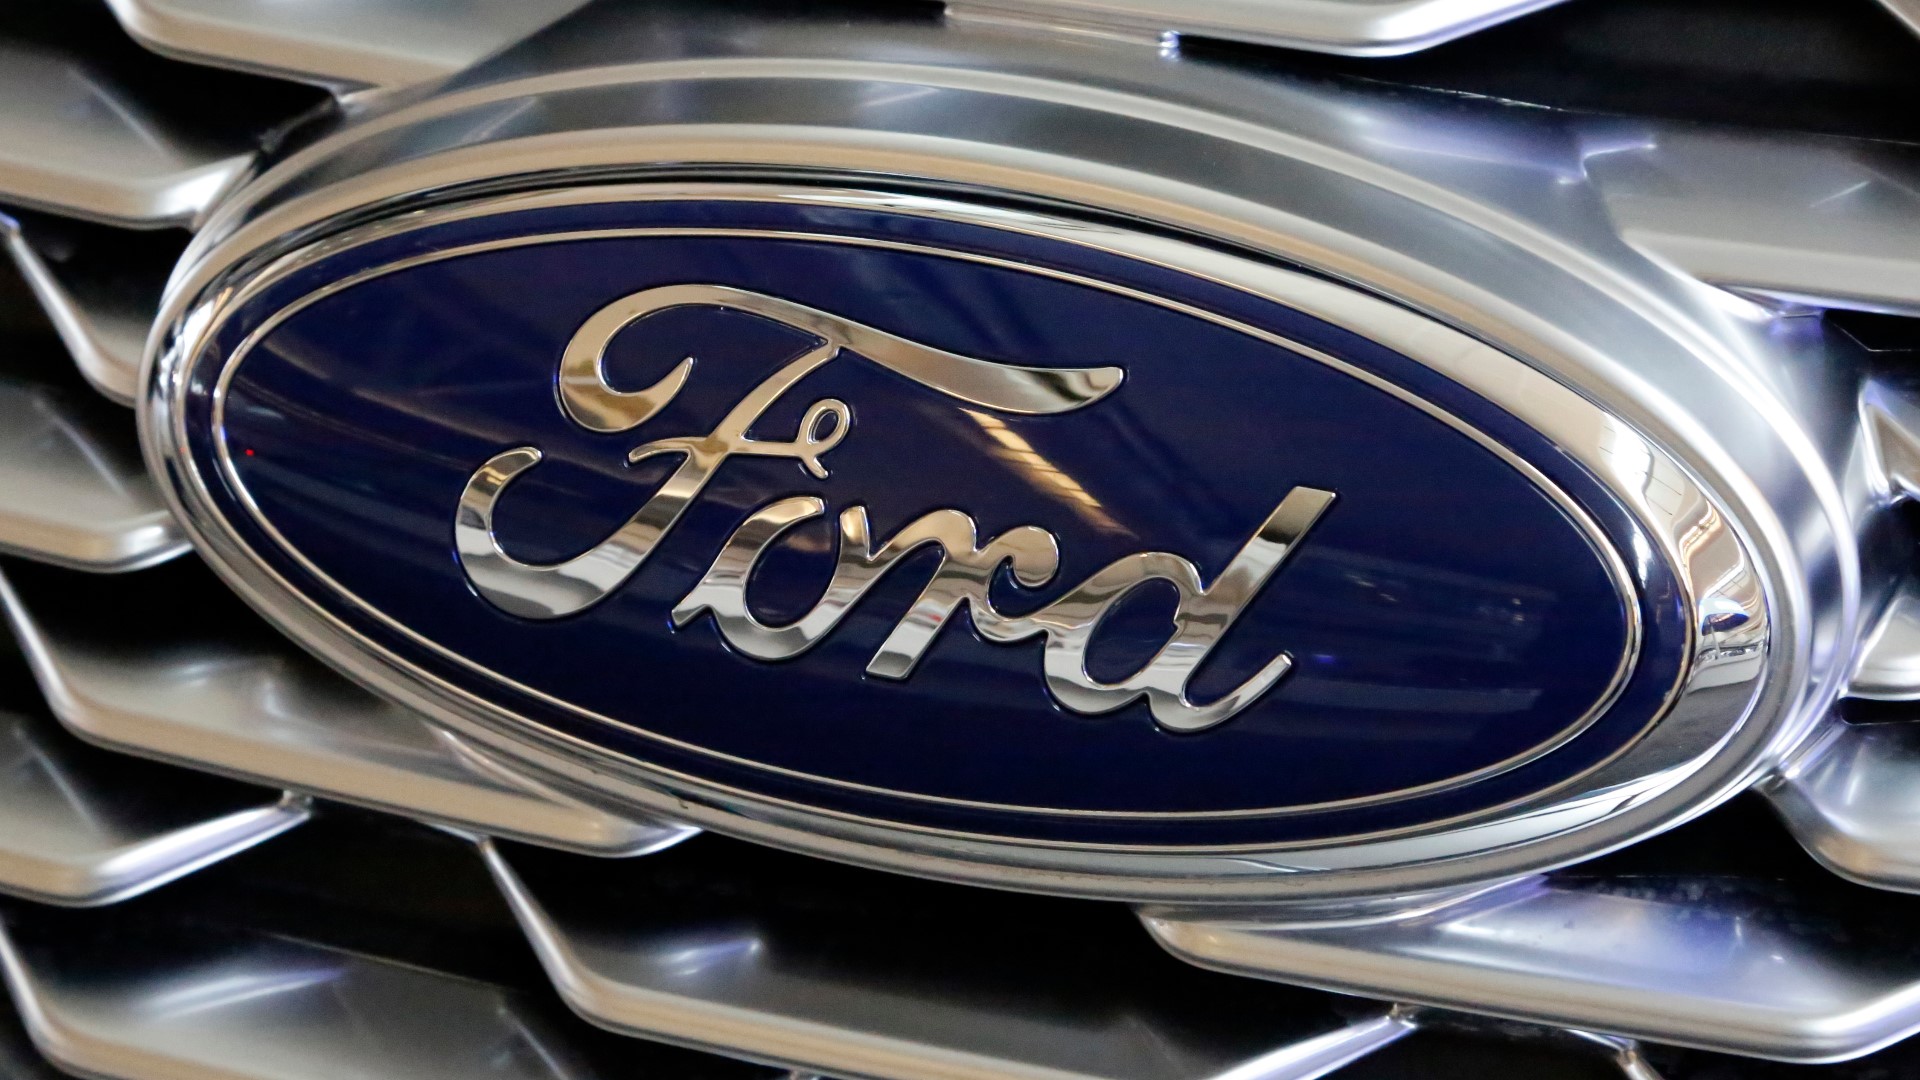 Ford is recalling more than 268,000 cars in North America to fix doors that could open unexpectedly or may not close.